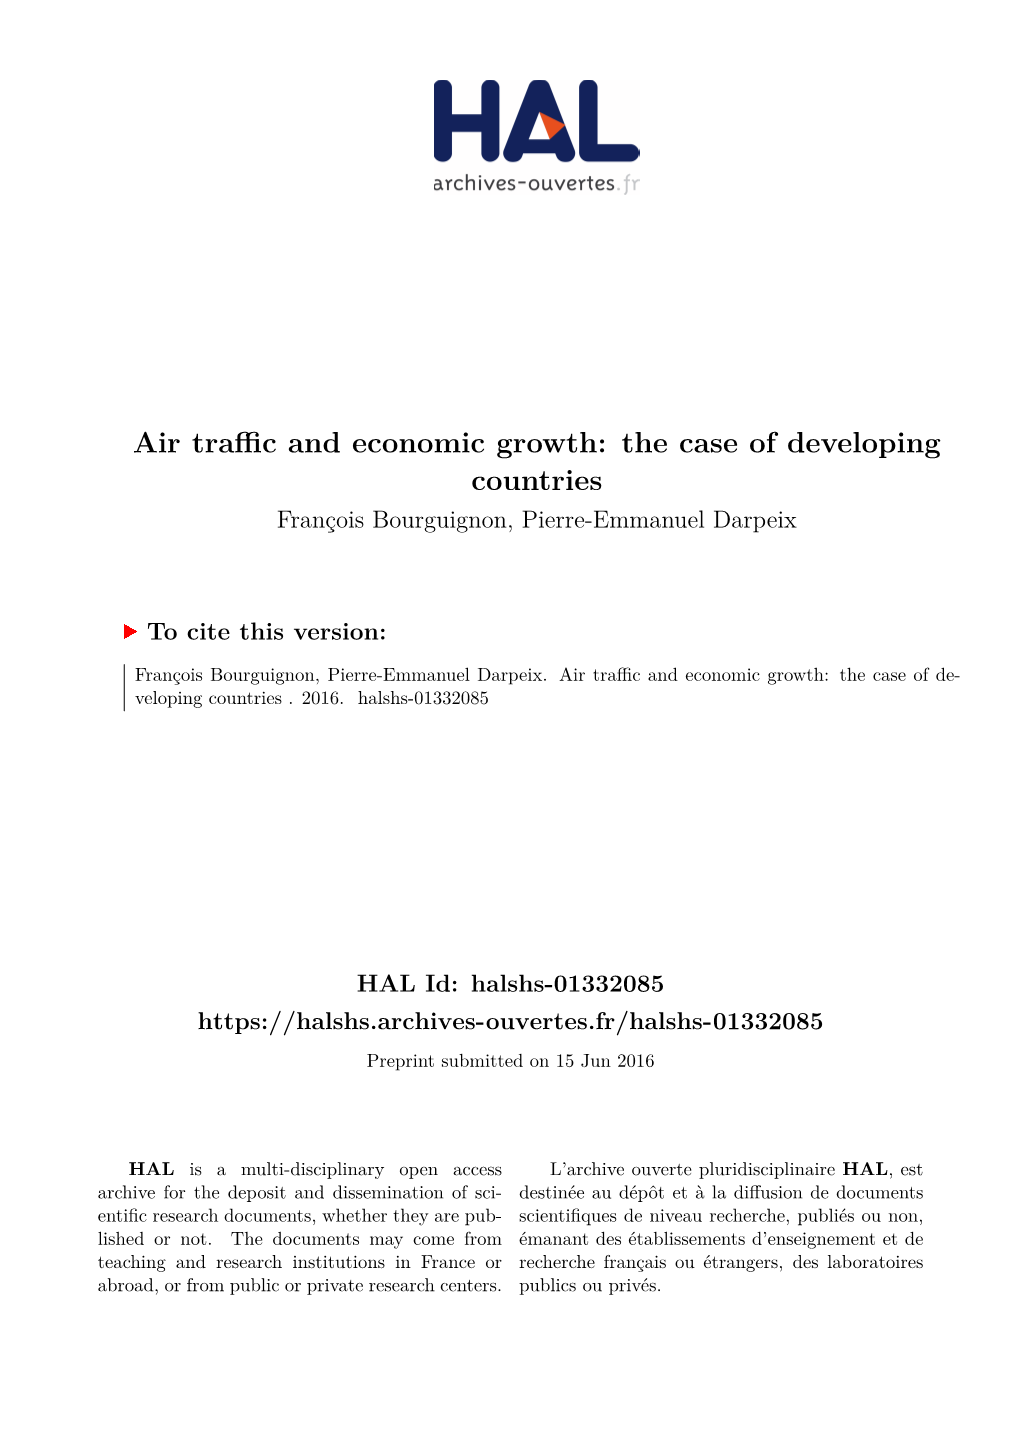 Air Traffic and Economic Growth: the Case of Developing Countries